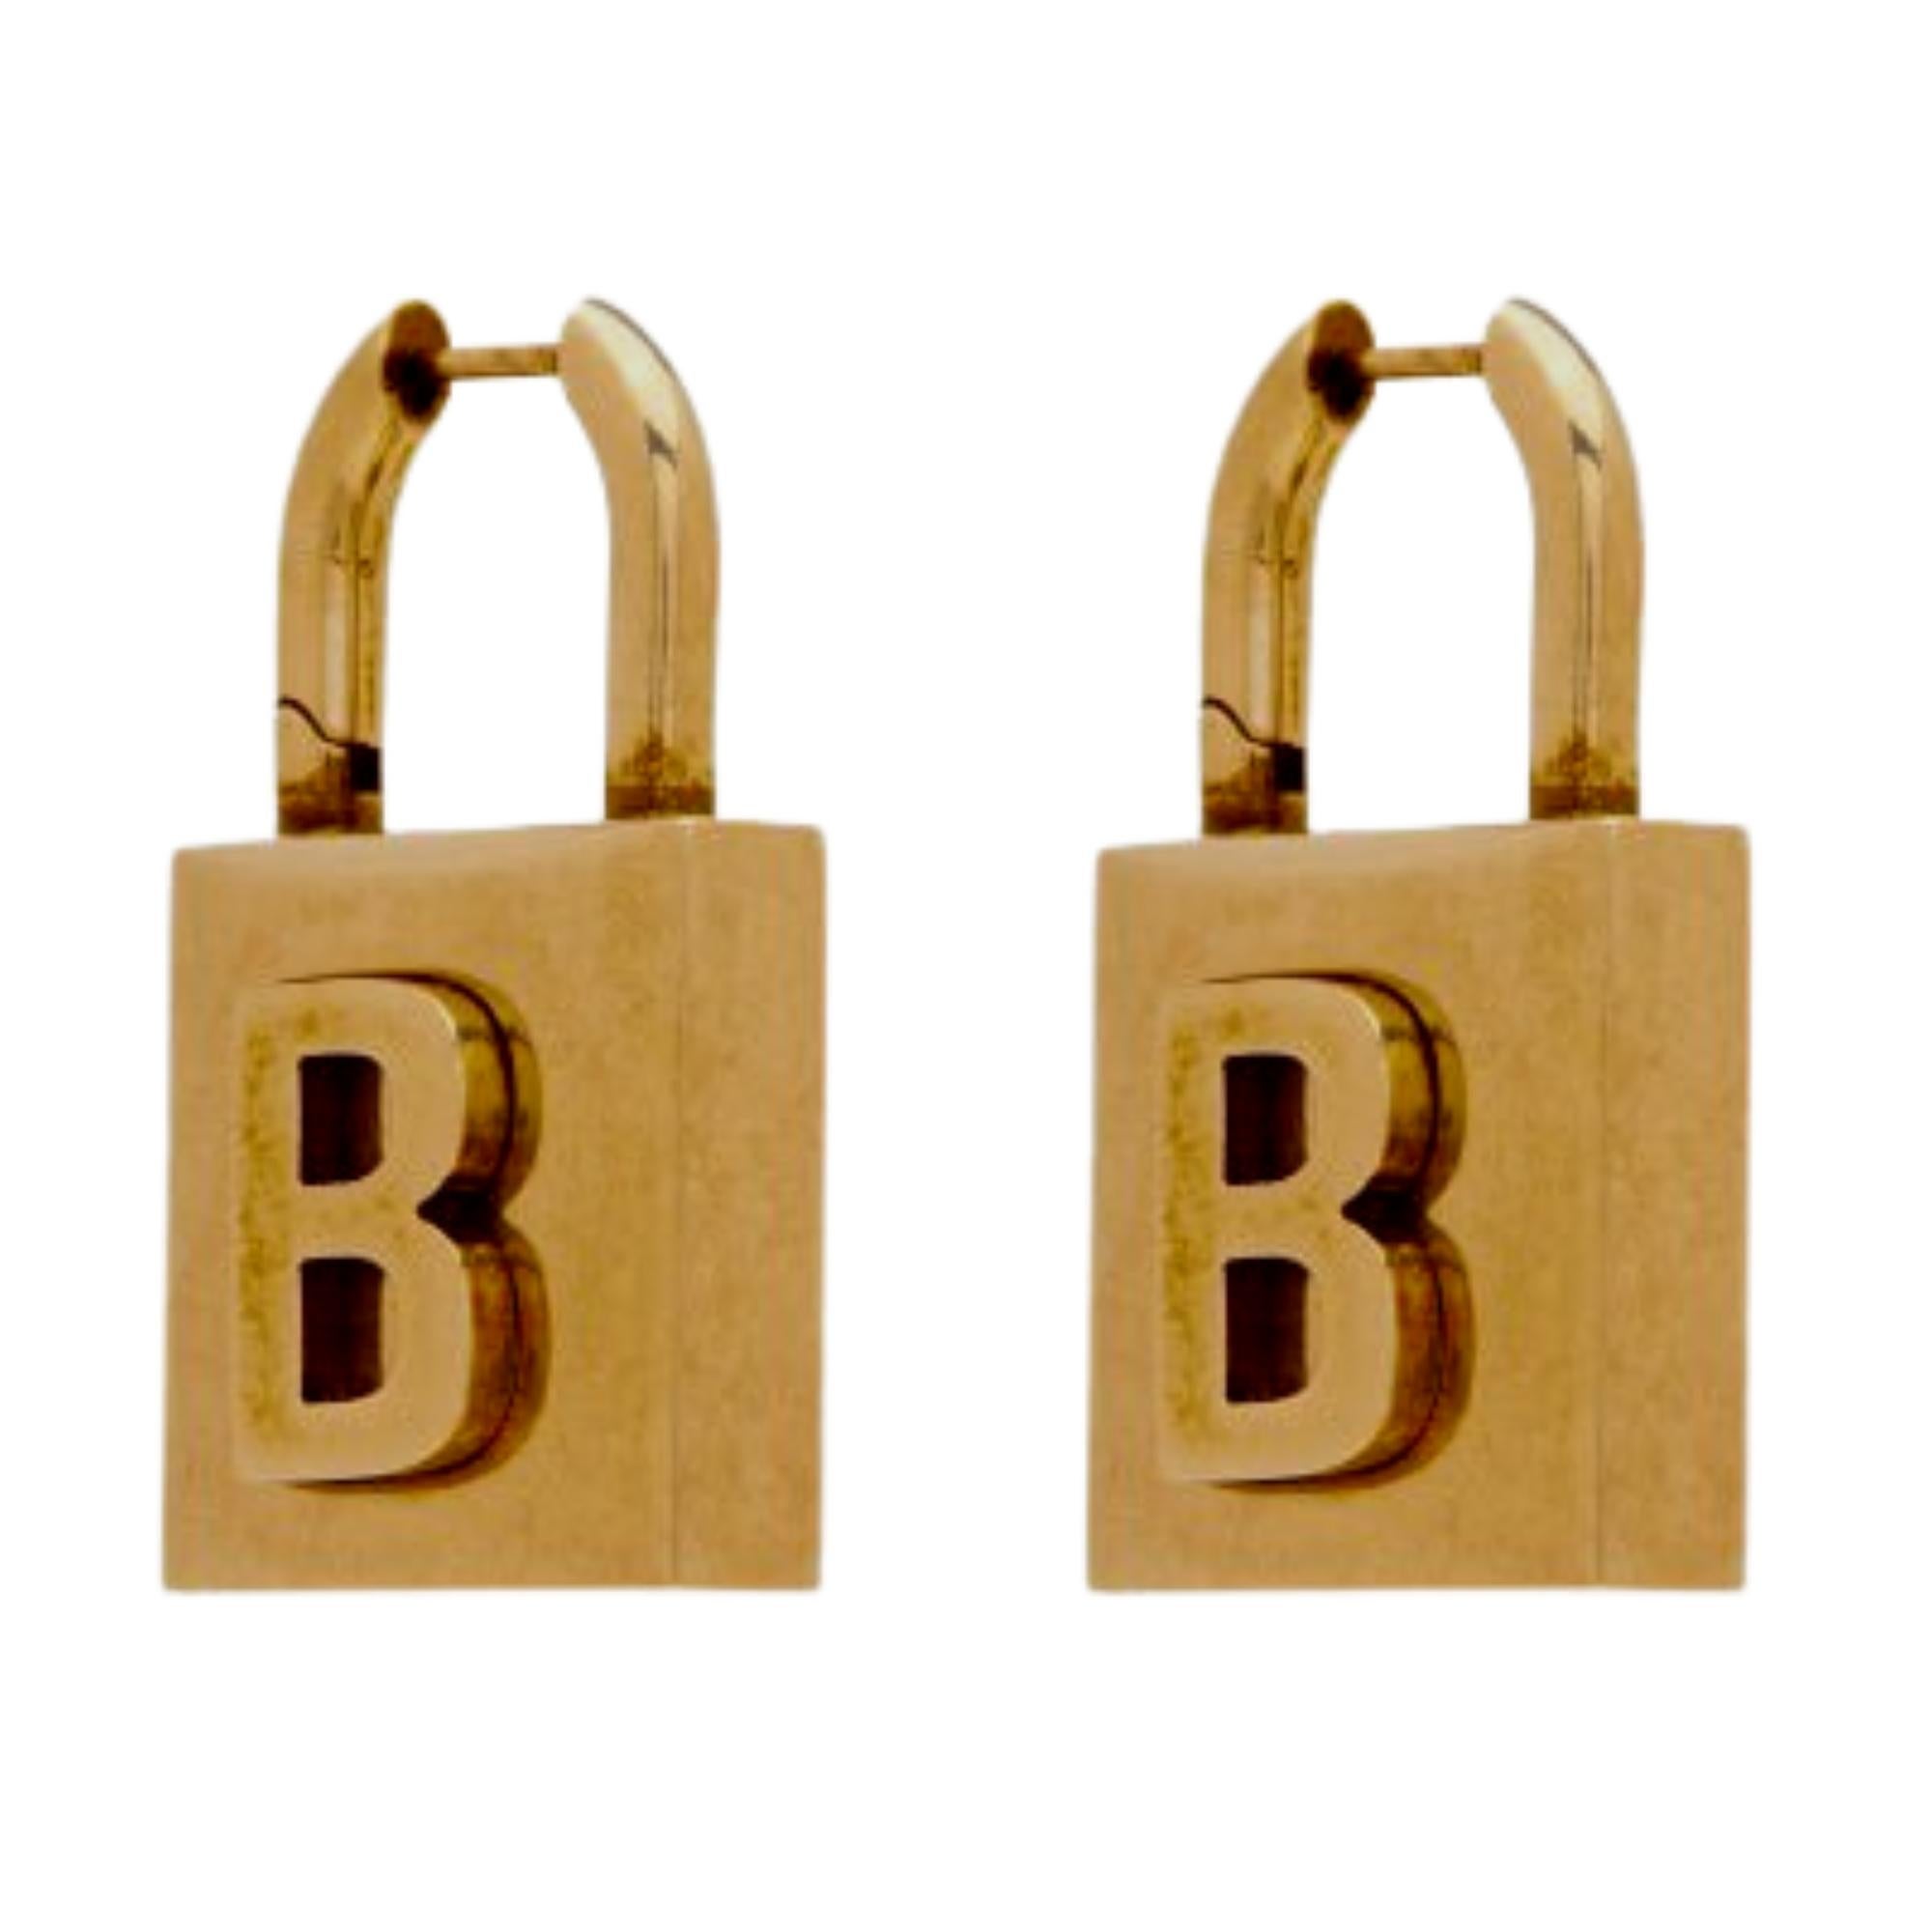 These Balenciaga drop earrings are constructed of antiqued gold-tone brass and feature logo engraving on the padlock pendant at face. Hinged-post fastening.

Color: Antique gold tone
Material: Brass
Marks: Logo stamp & Made in Italy 
Clasp Style: